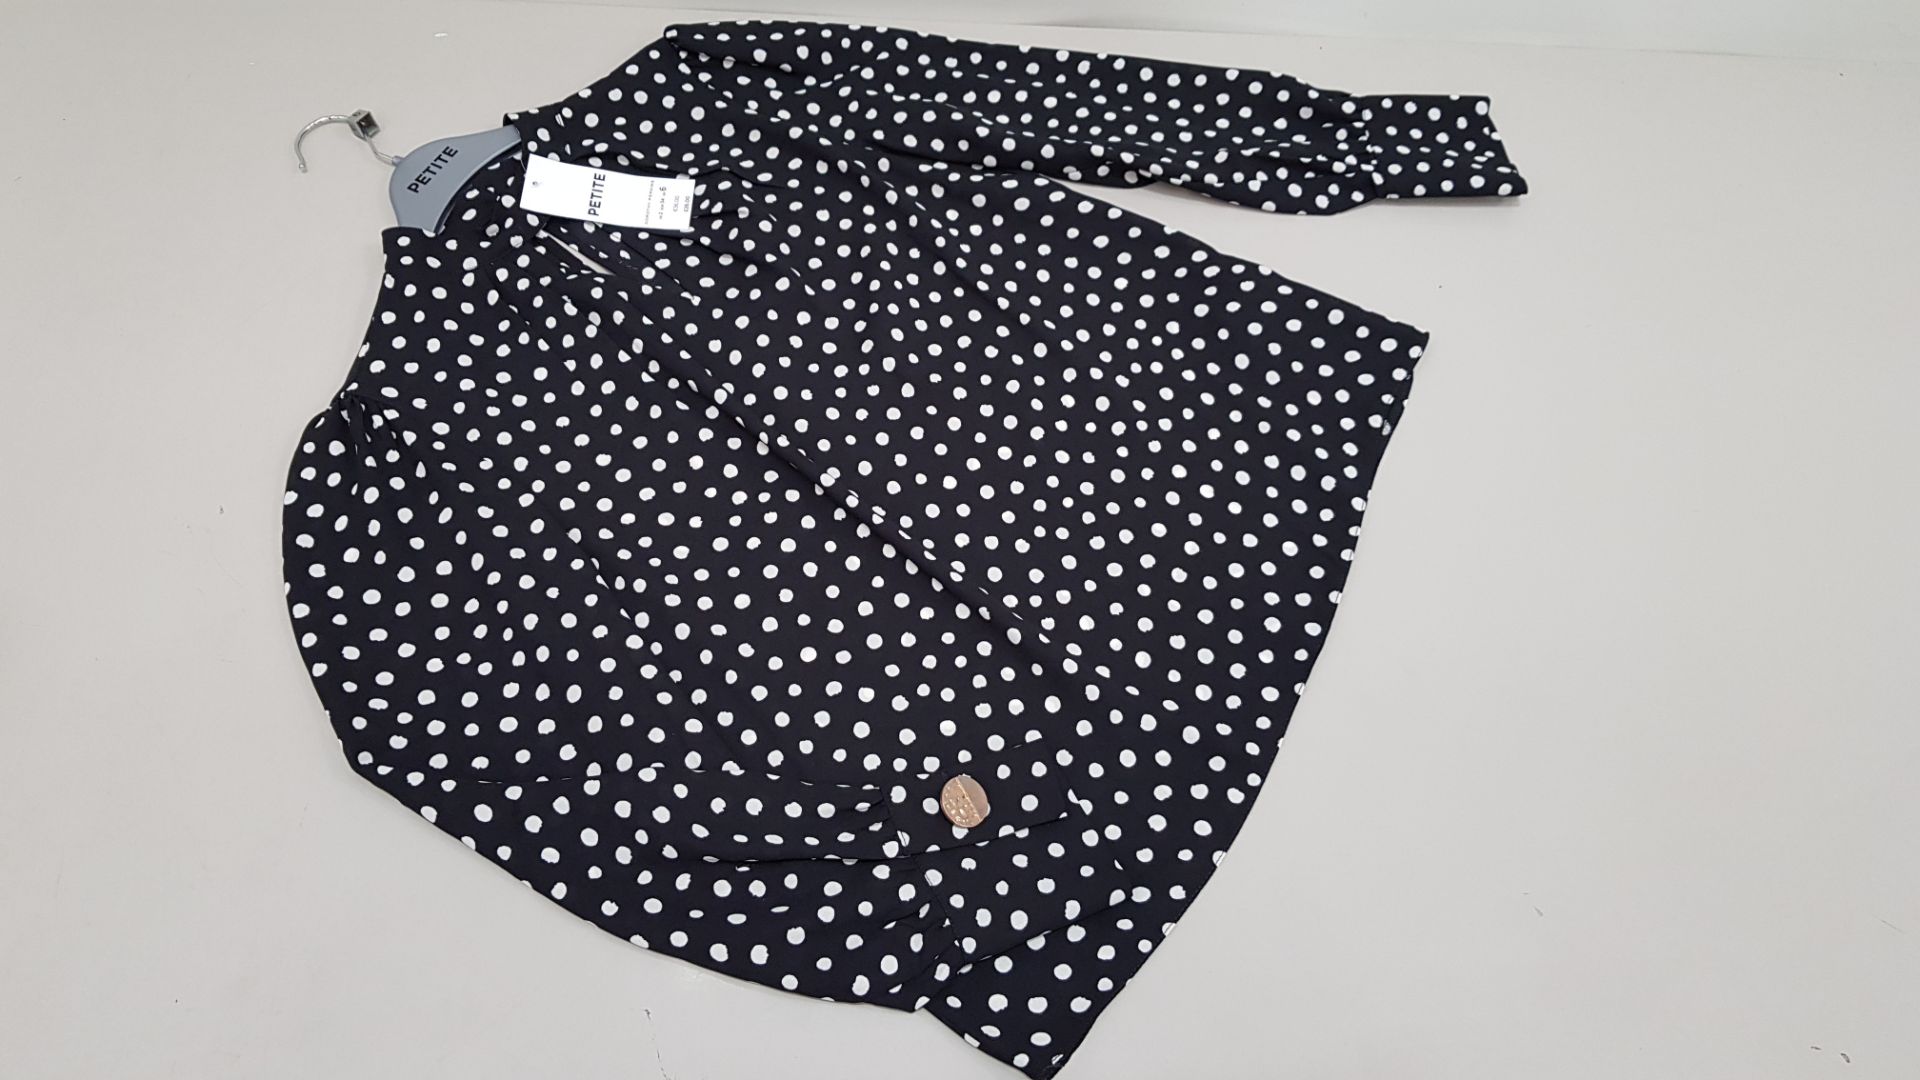 40 X BRAND NEW DOROTHY PERKINS PETITE DOTTED BLOUSES UK SIZE 6 RRP £26.00 (TOTAL RRP £1040.00)